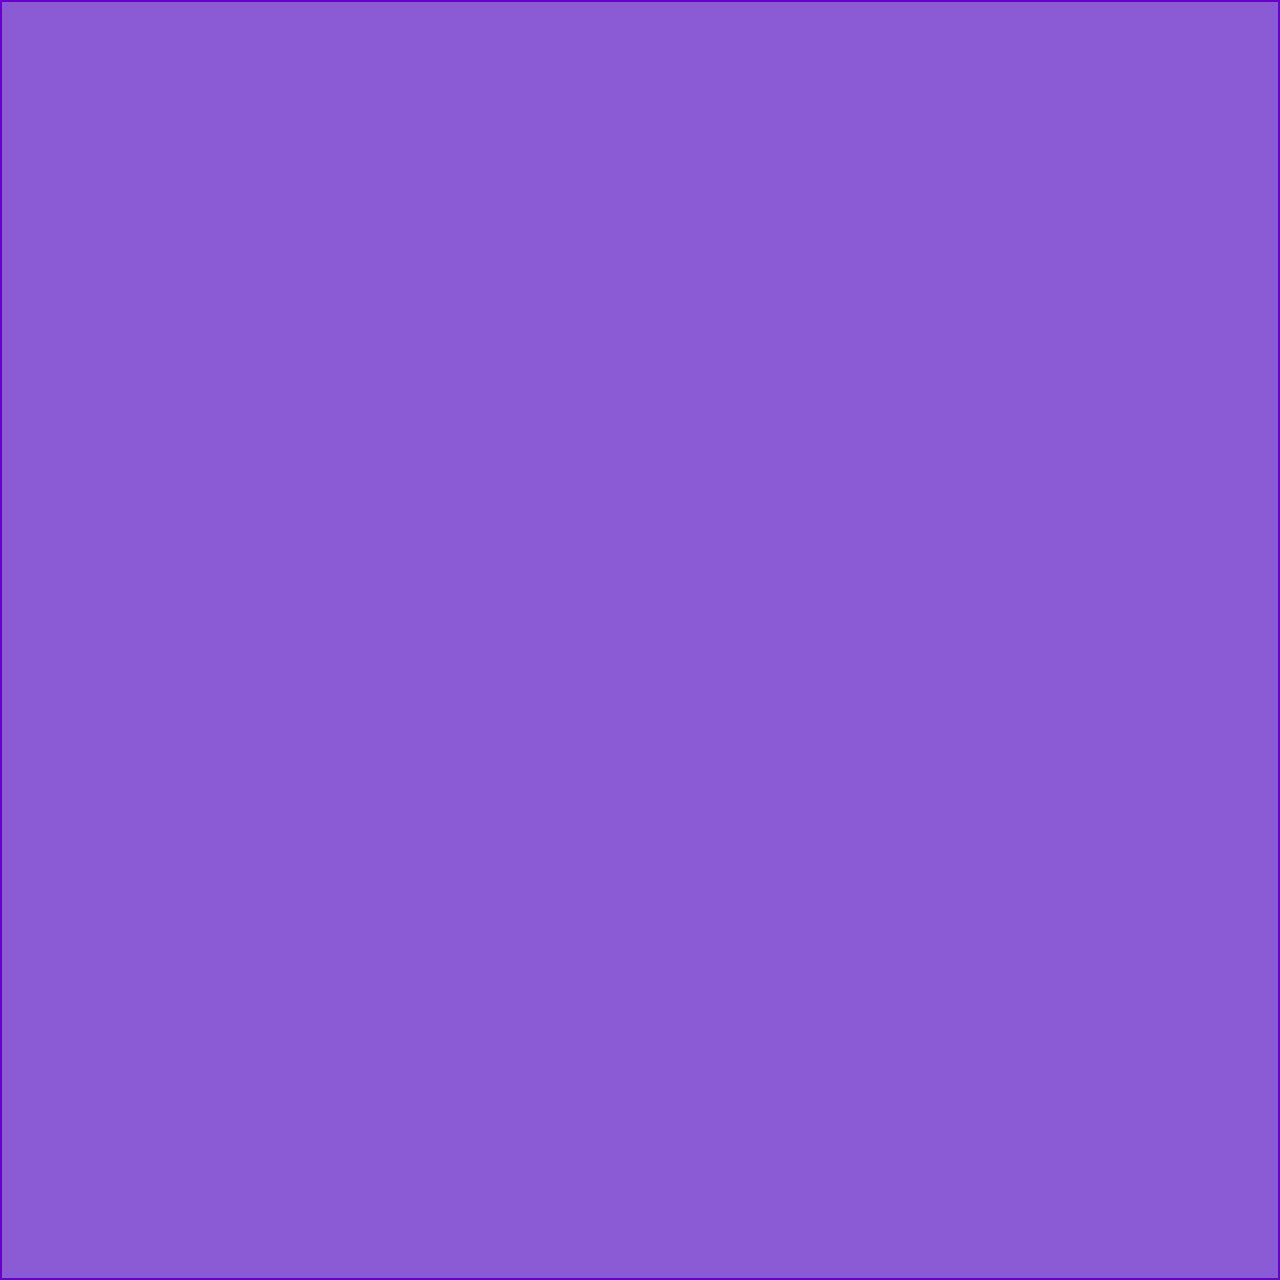 Waterslide Decal Sheet: Lilac Enamel for Fused Glass or Ceramics (33712) 